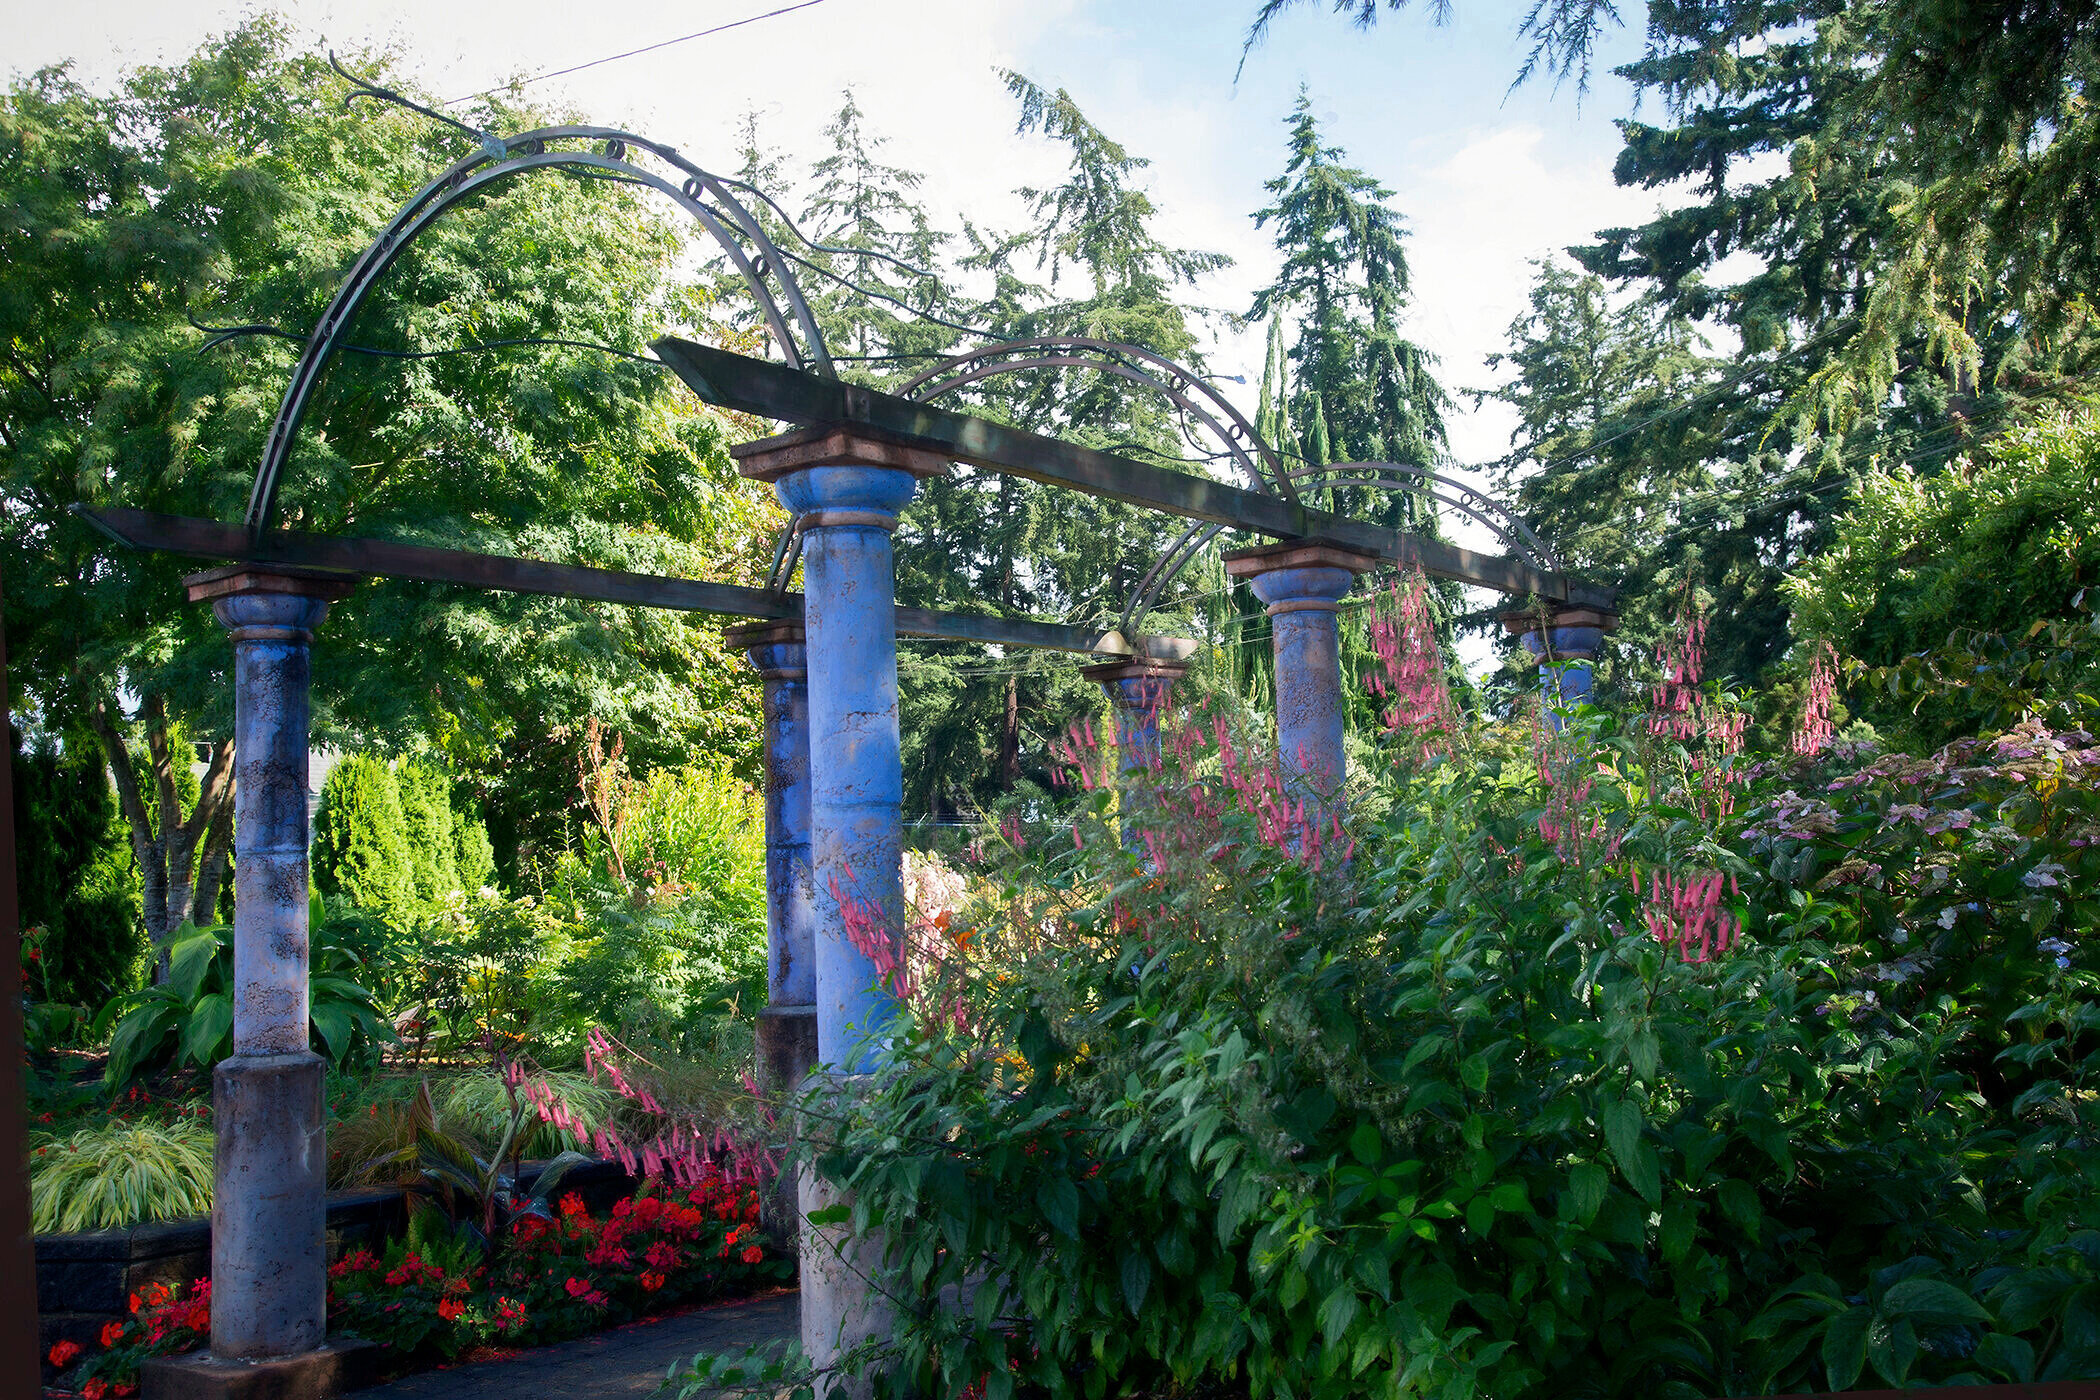 Evergreen Arboretum And Gardens, How To Build An Arched Garden Arboretum